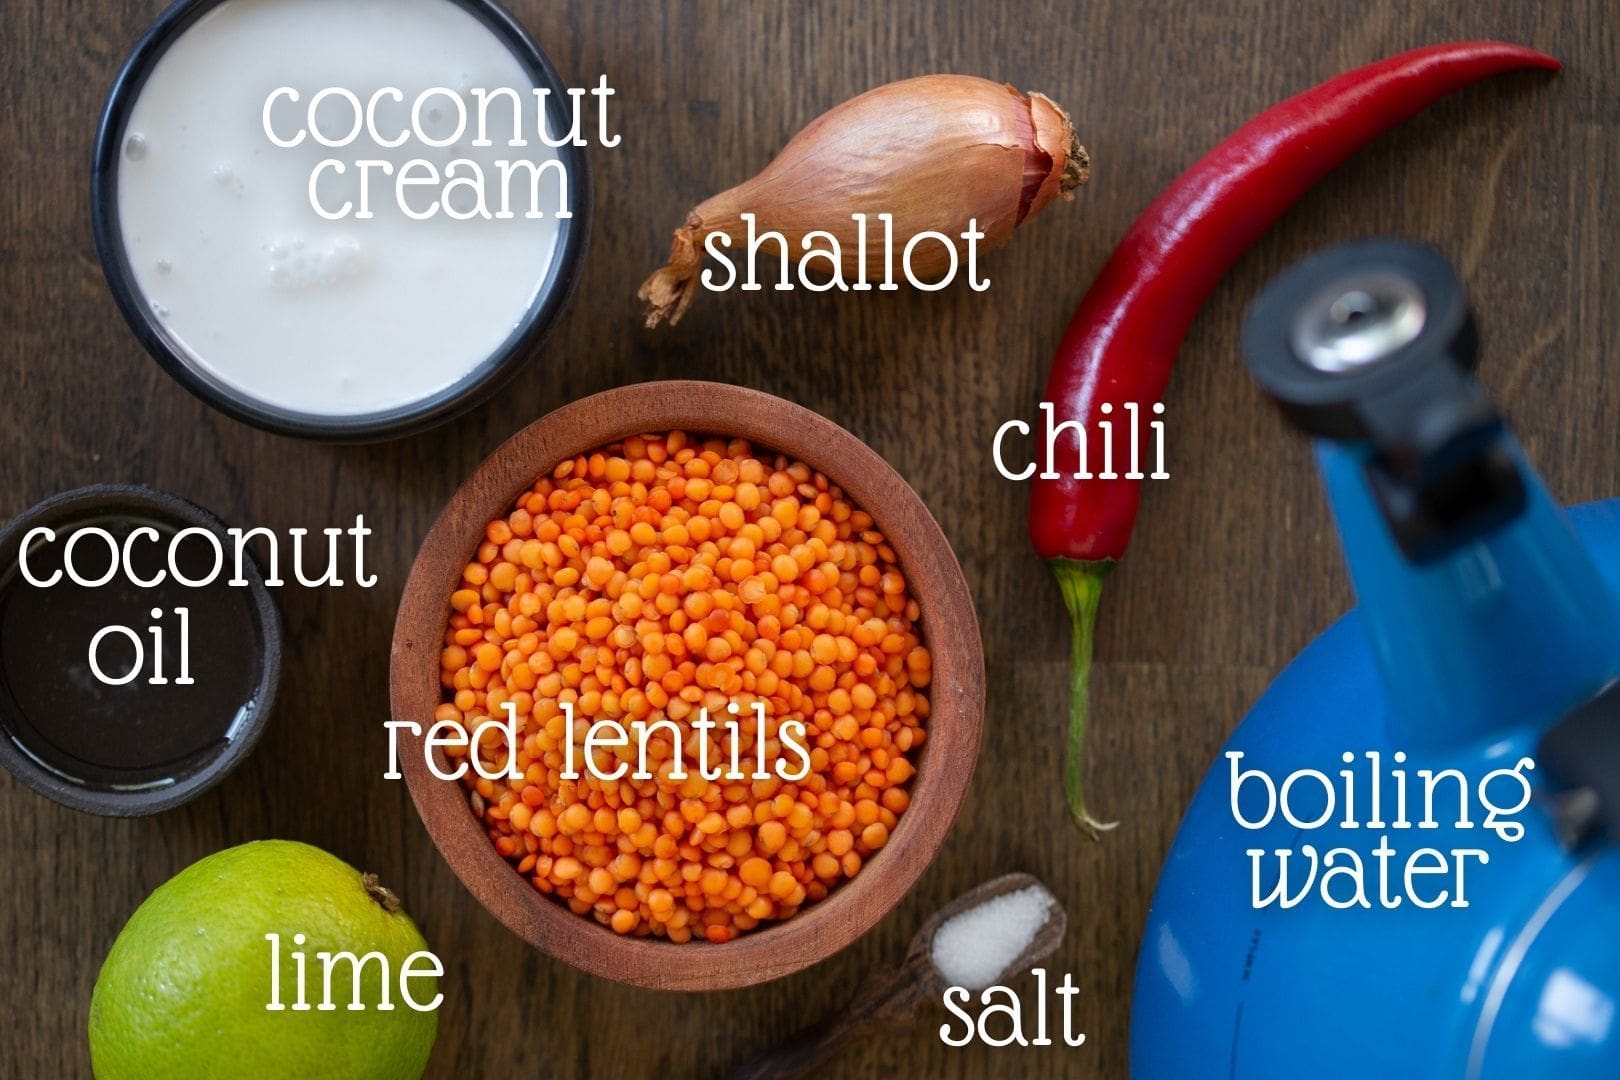 Overhead view of the ingredients needed with a description.